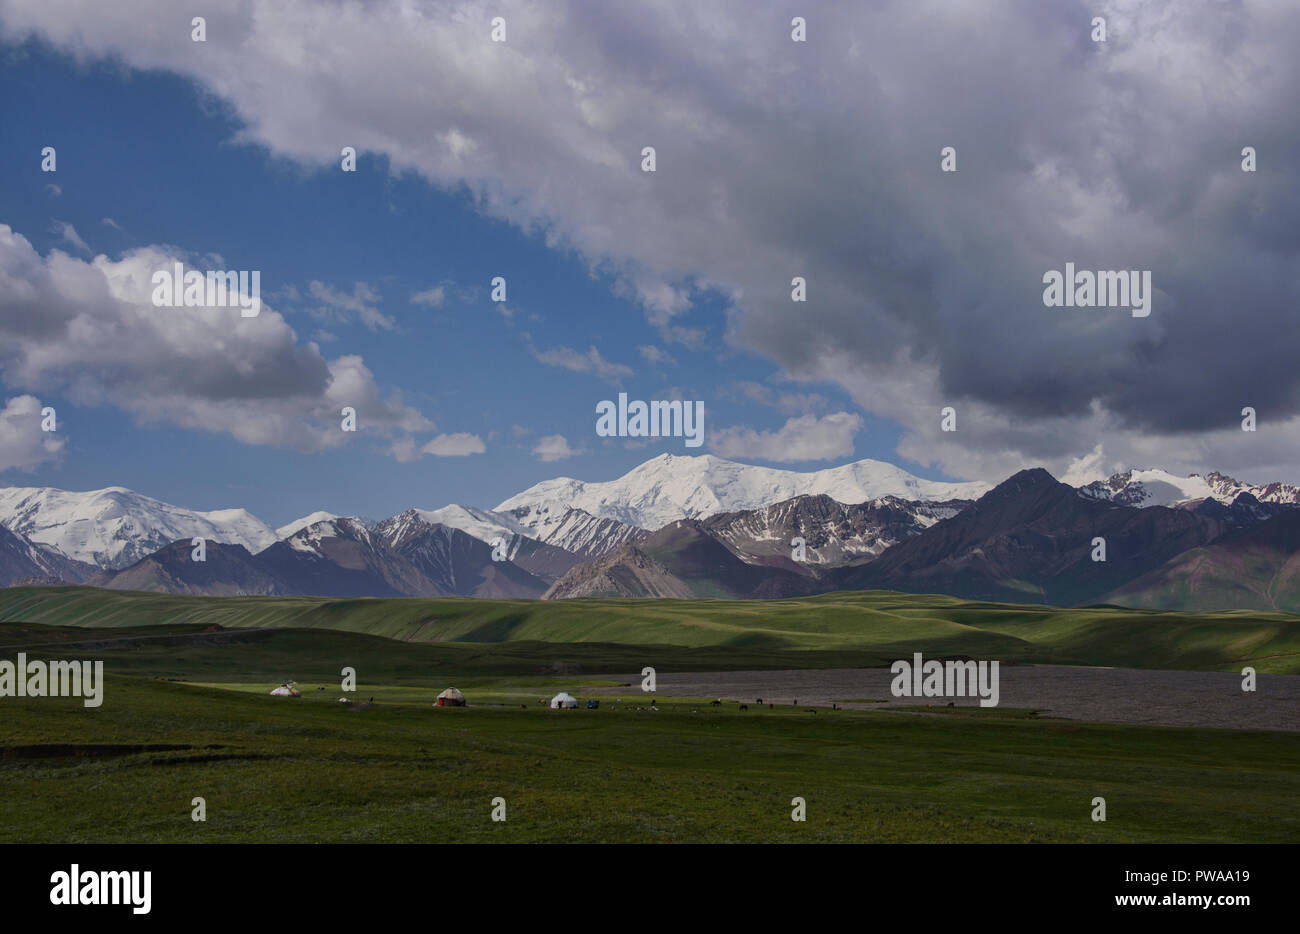 The High Pamirs rise over nomadic yurts along the Pamir Highway, Kyrgyzstan Stock Photo